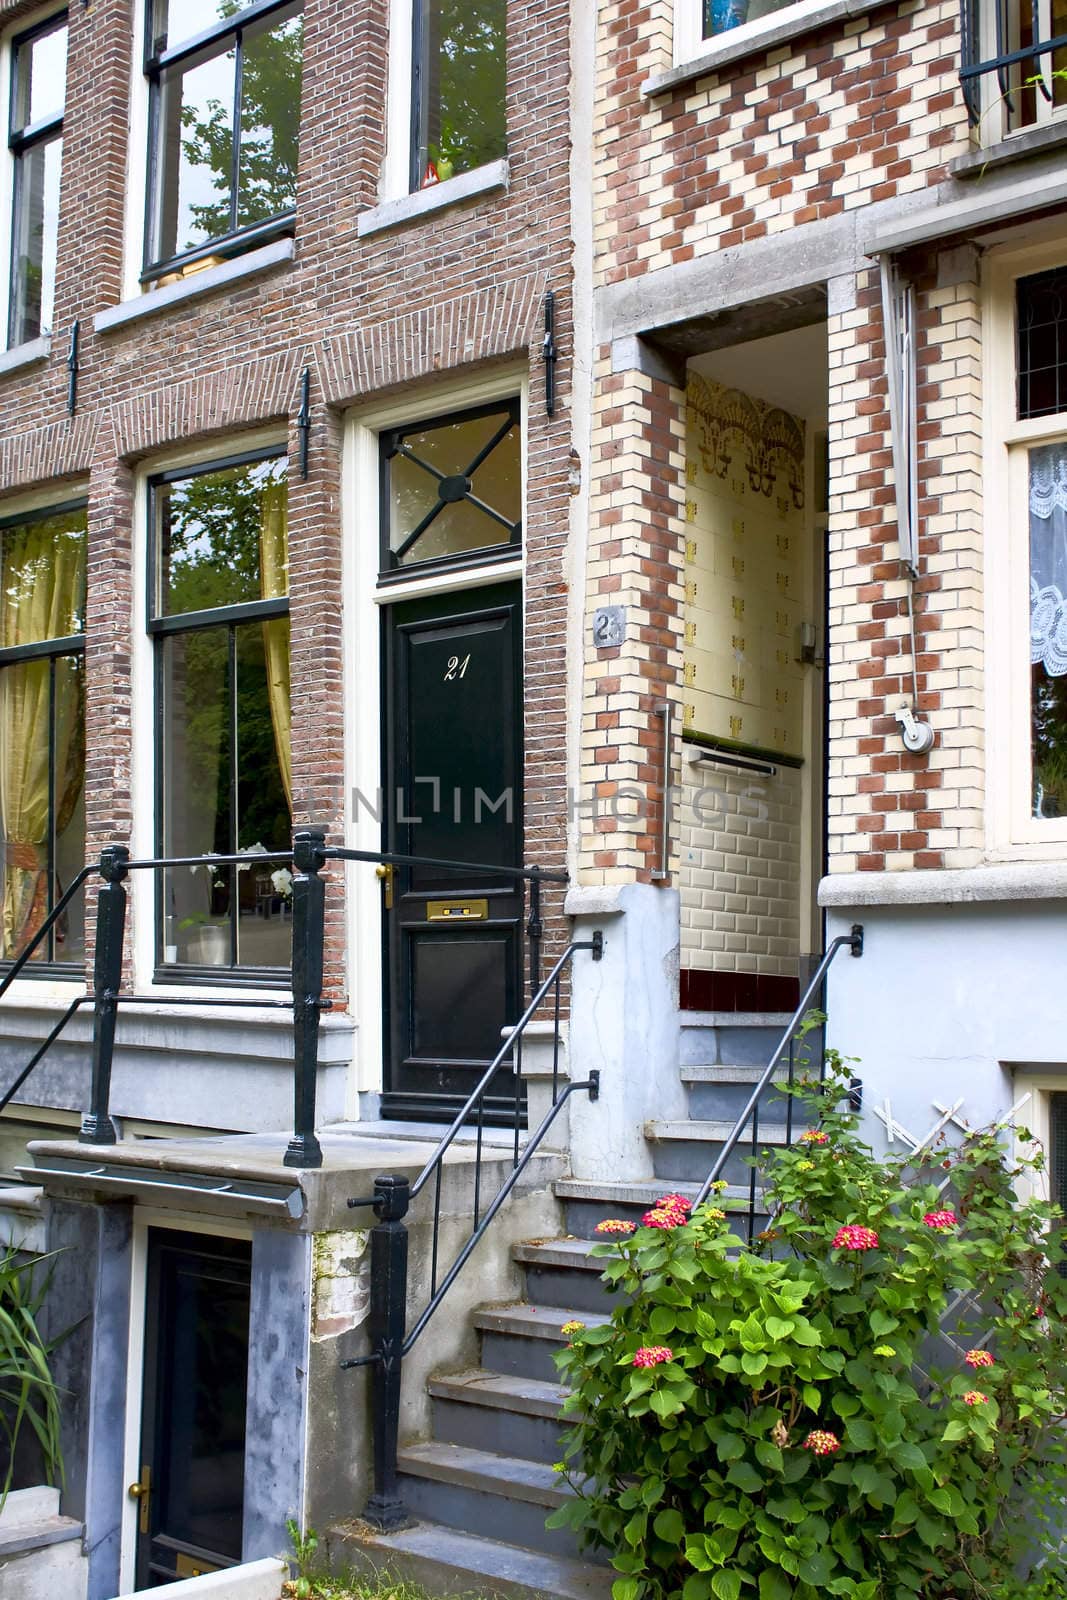 Typical house in center of Amsterdam